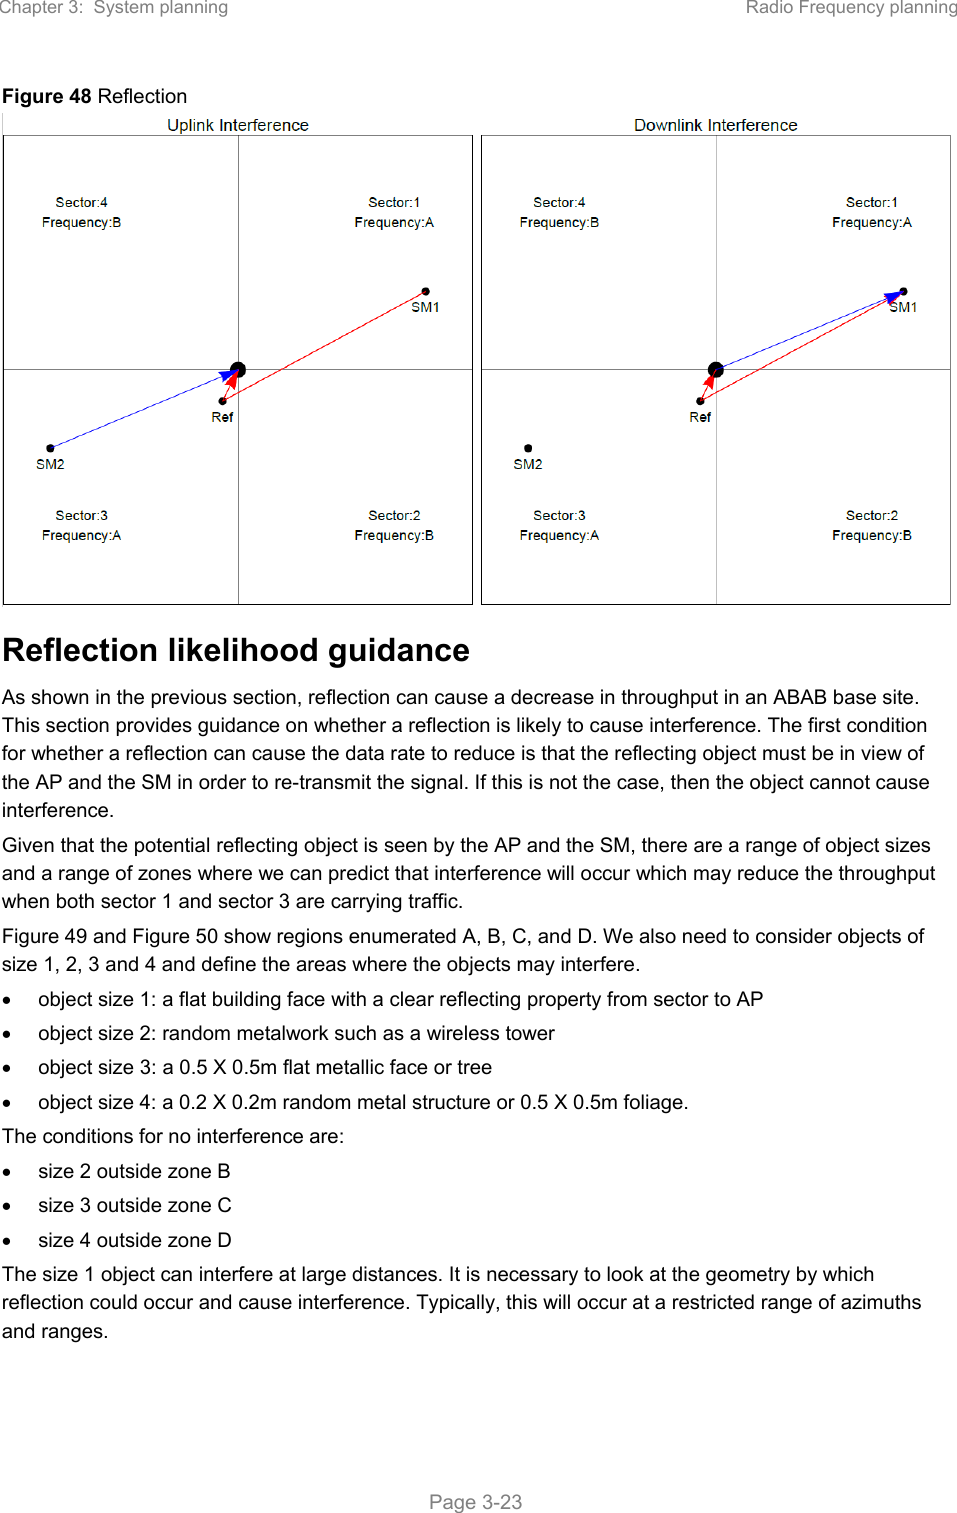 Chapter 3:  System planning  Radio Frequency planning   Page 3-23 Figure 48 Reflection  Reflection likelihood guidance As shown in the previous section, reflection can cause a decrease in throughput in an ABAB base site. This section provides guidance on whether a reflection is likely to cause interference. The first condition for whether a reflection can cause the data rate to reduce is that the reflecting object must be in view of the AP and the SM in order to re-transmit the signal. If this is not the case, then the object cannot cause interference. Given that the potential reflecting object is seen by the AP and the SM, there are a range of object sizes and a range of zones where we can predict that interference will occur which may reduce the throughput when both sector 1 and sector 3 are carrying traffic.  Figure 49 and Figure 50 show regions enumerated A, B, C, and D. We also need to consider objects of size 1, 2, 3 and 4 and define the areas where the objects may interfere.   object size 1: a flat building face with a clear reflecting property from sector to AP   object size 2: random metalwork such as a wireless tower   object size 3: a 0.5 X 0.5m flat metallic face or tree   object size 4: a 0.2 X 0.2m random metal structure or 0.5 X 0.5m foliage. The conditions for no interference are:   size 2 outside zone B   size 3 outside zone C   size 4 outside zone D The size 1 object can interfere at large distances. It is necessary to look at the geometry by which reflection could occur and cause interference. Typically, this will occur at a restricted range of azimuths and ranges.  